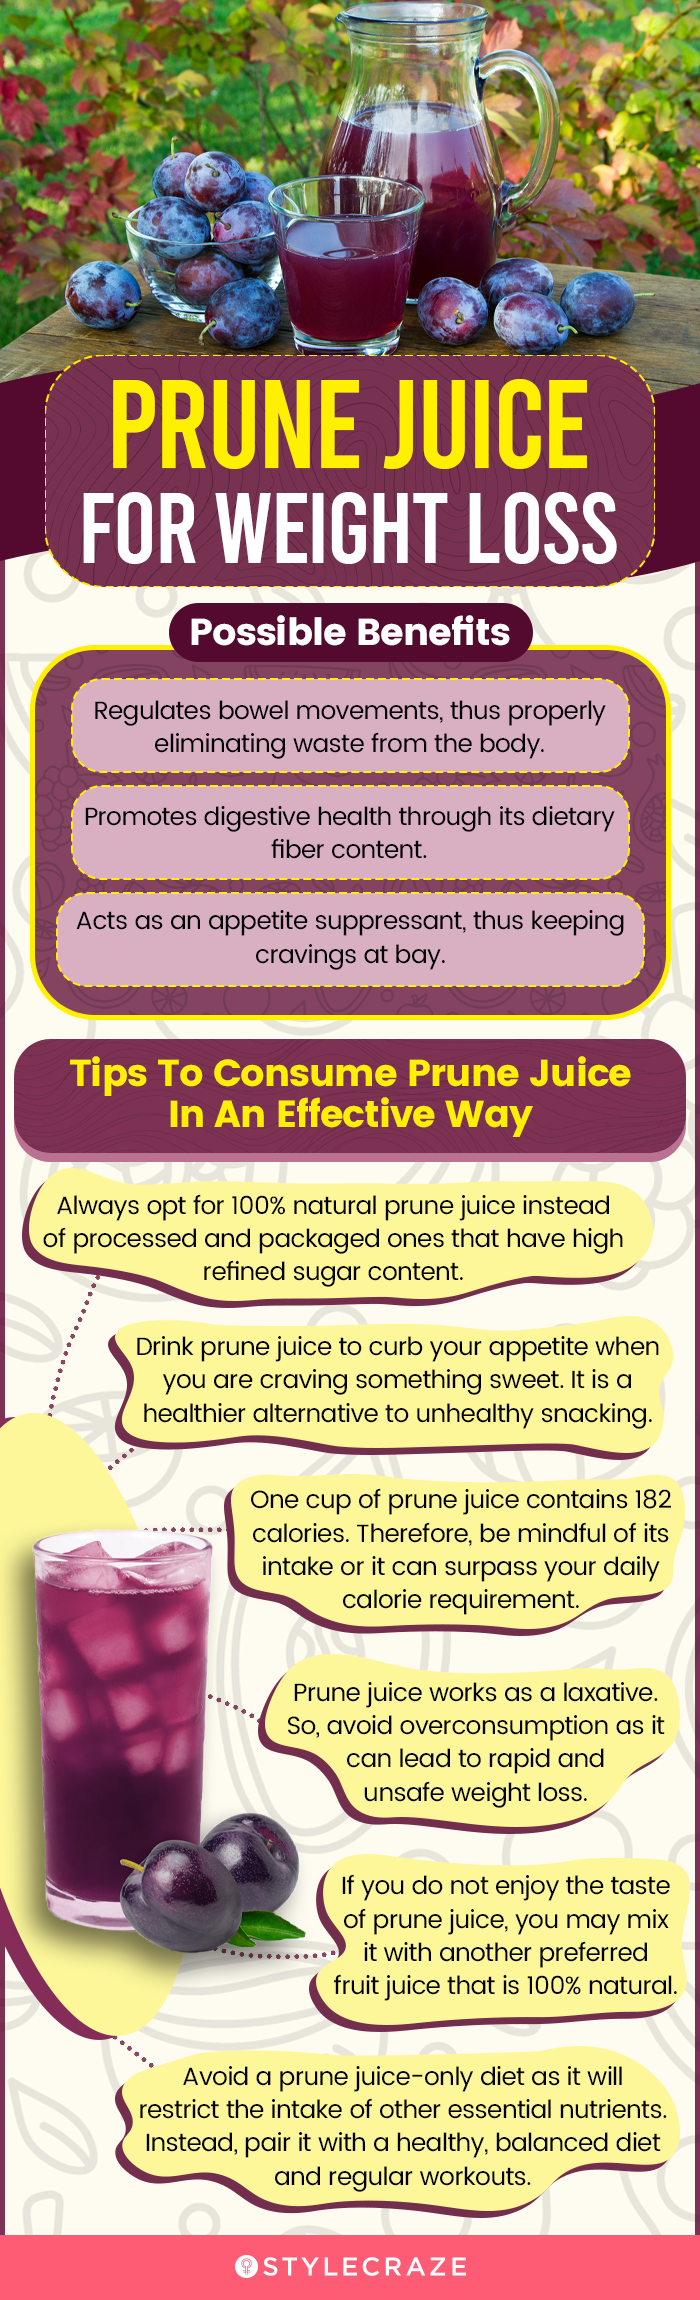 prune juice for weight loss (infographic)